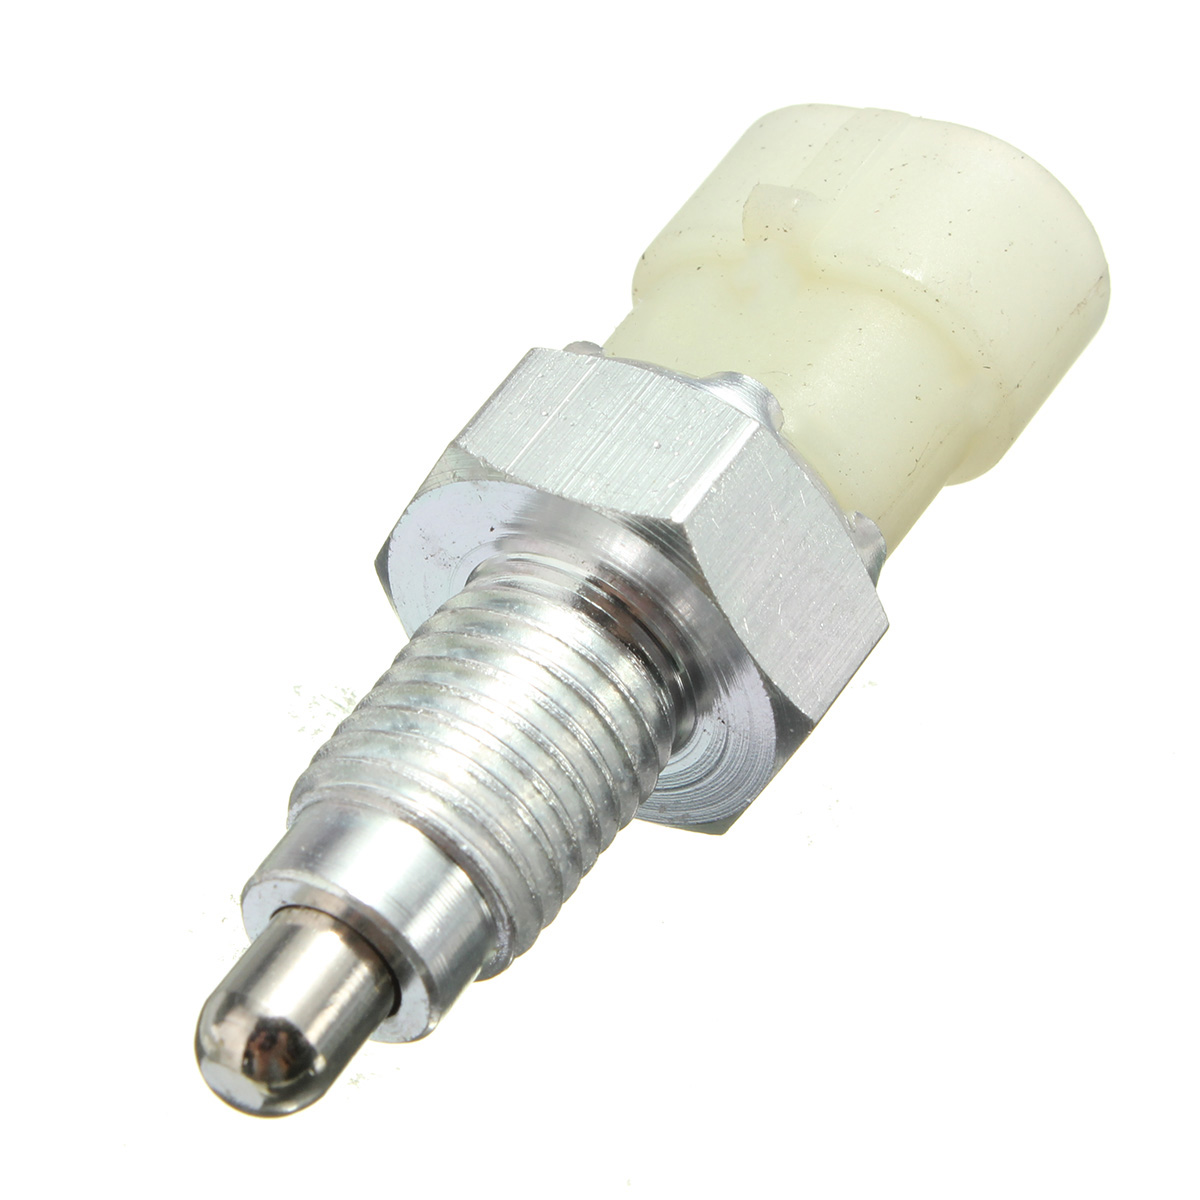 BLS28699
                                - 
                                - Back Up Lamp Switch
                                ....111335